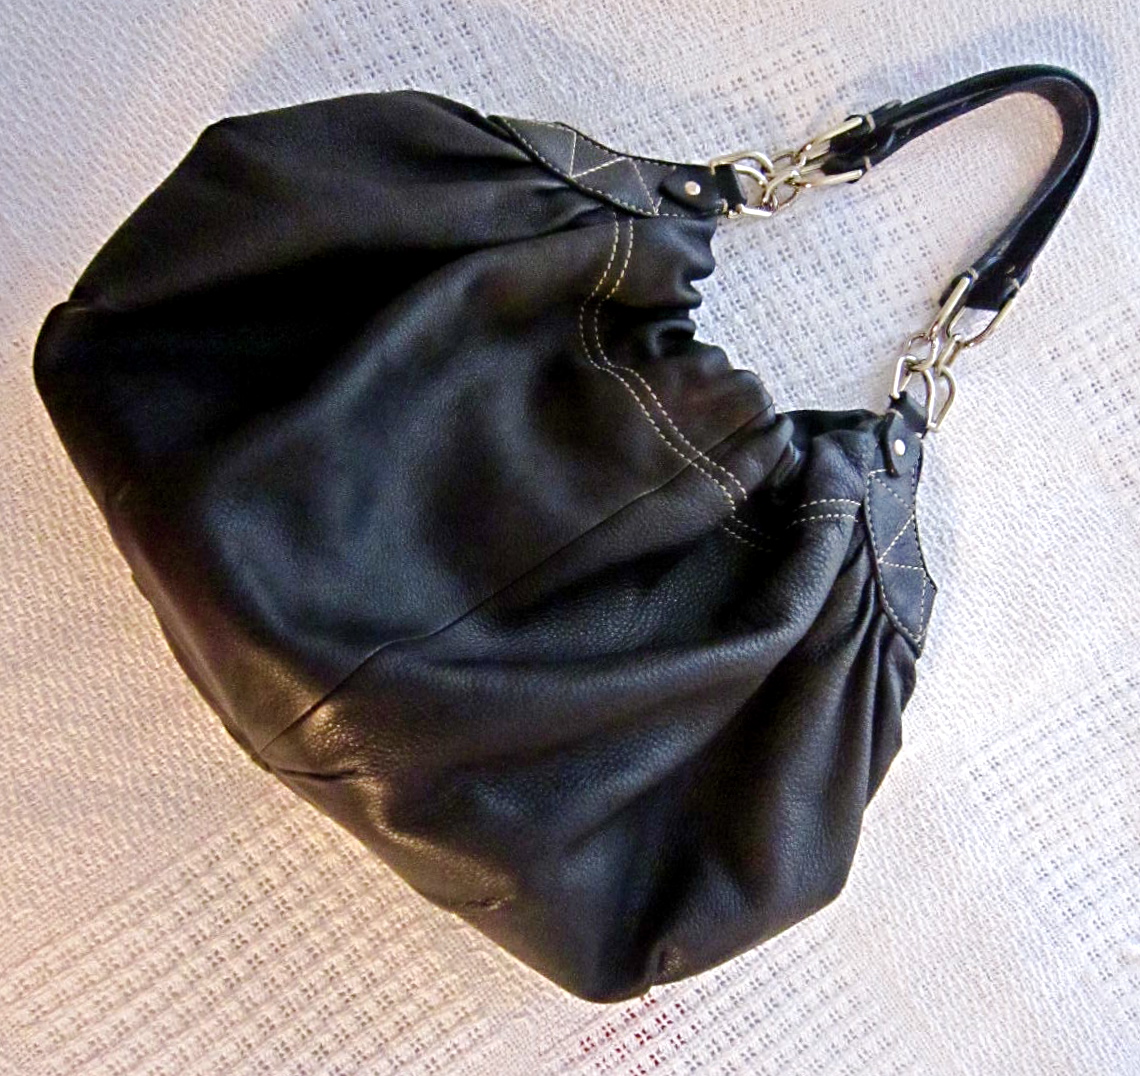 DISSONA SLING BAG ALL LEATHER IN BEAUTIFUL CONDITION AUTHENTIC